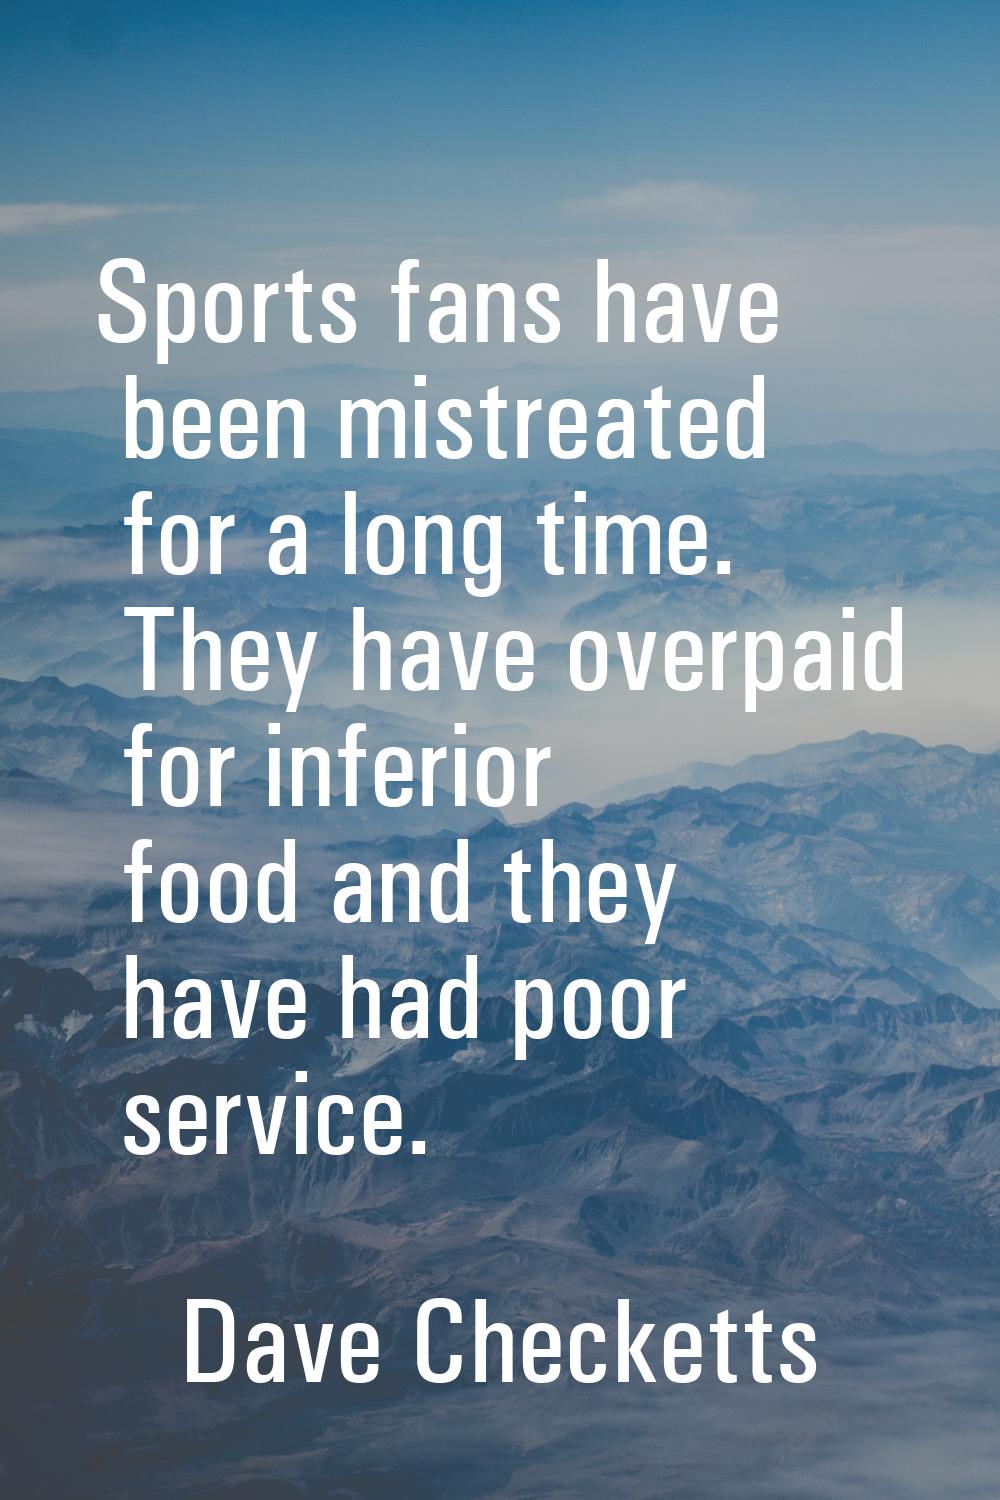 Sports fans have been mistreated for a long time. They have overpaid for inferior food and they hav